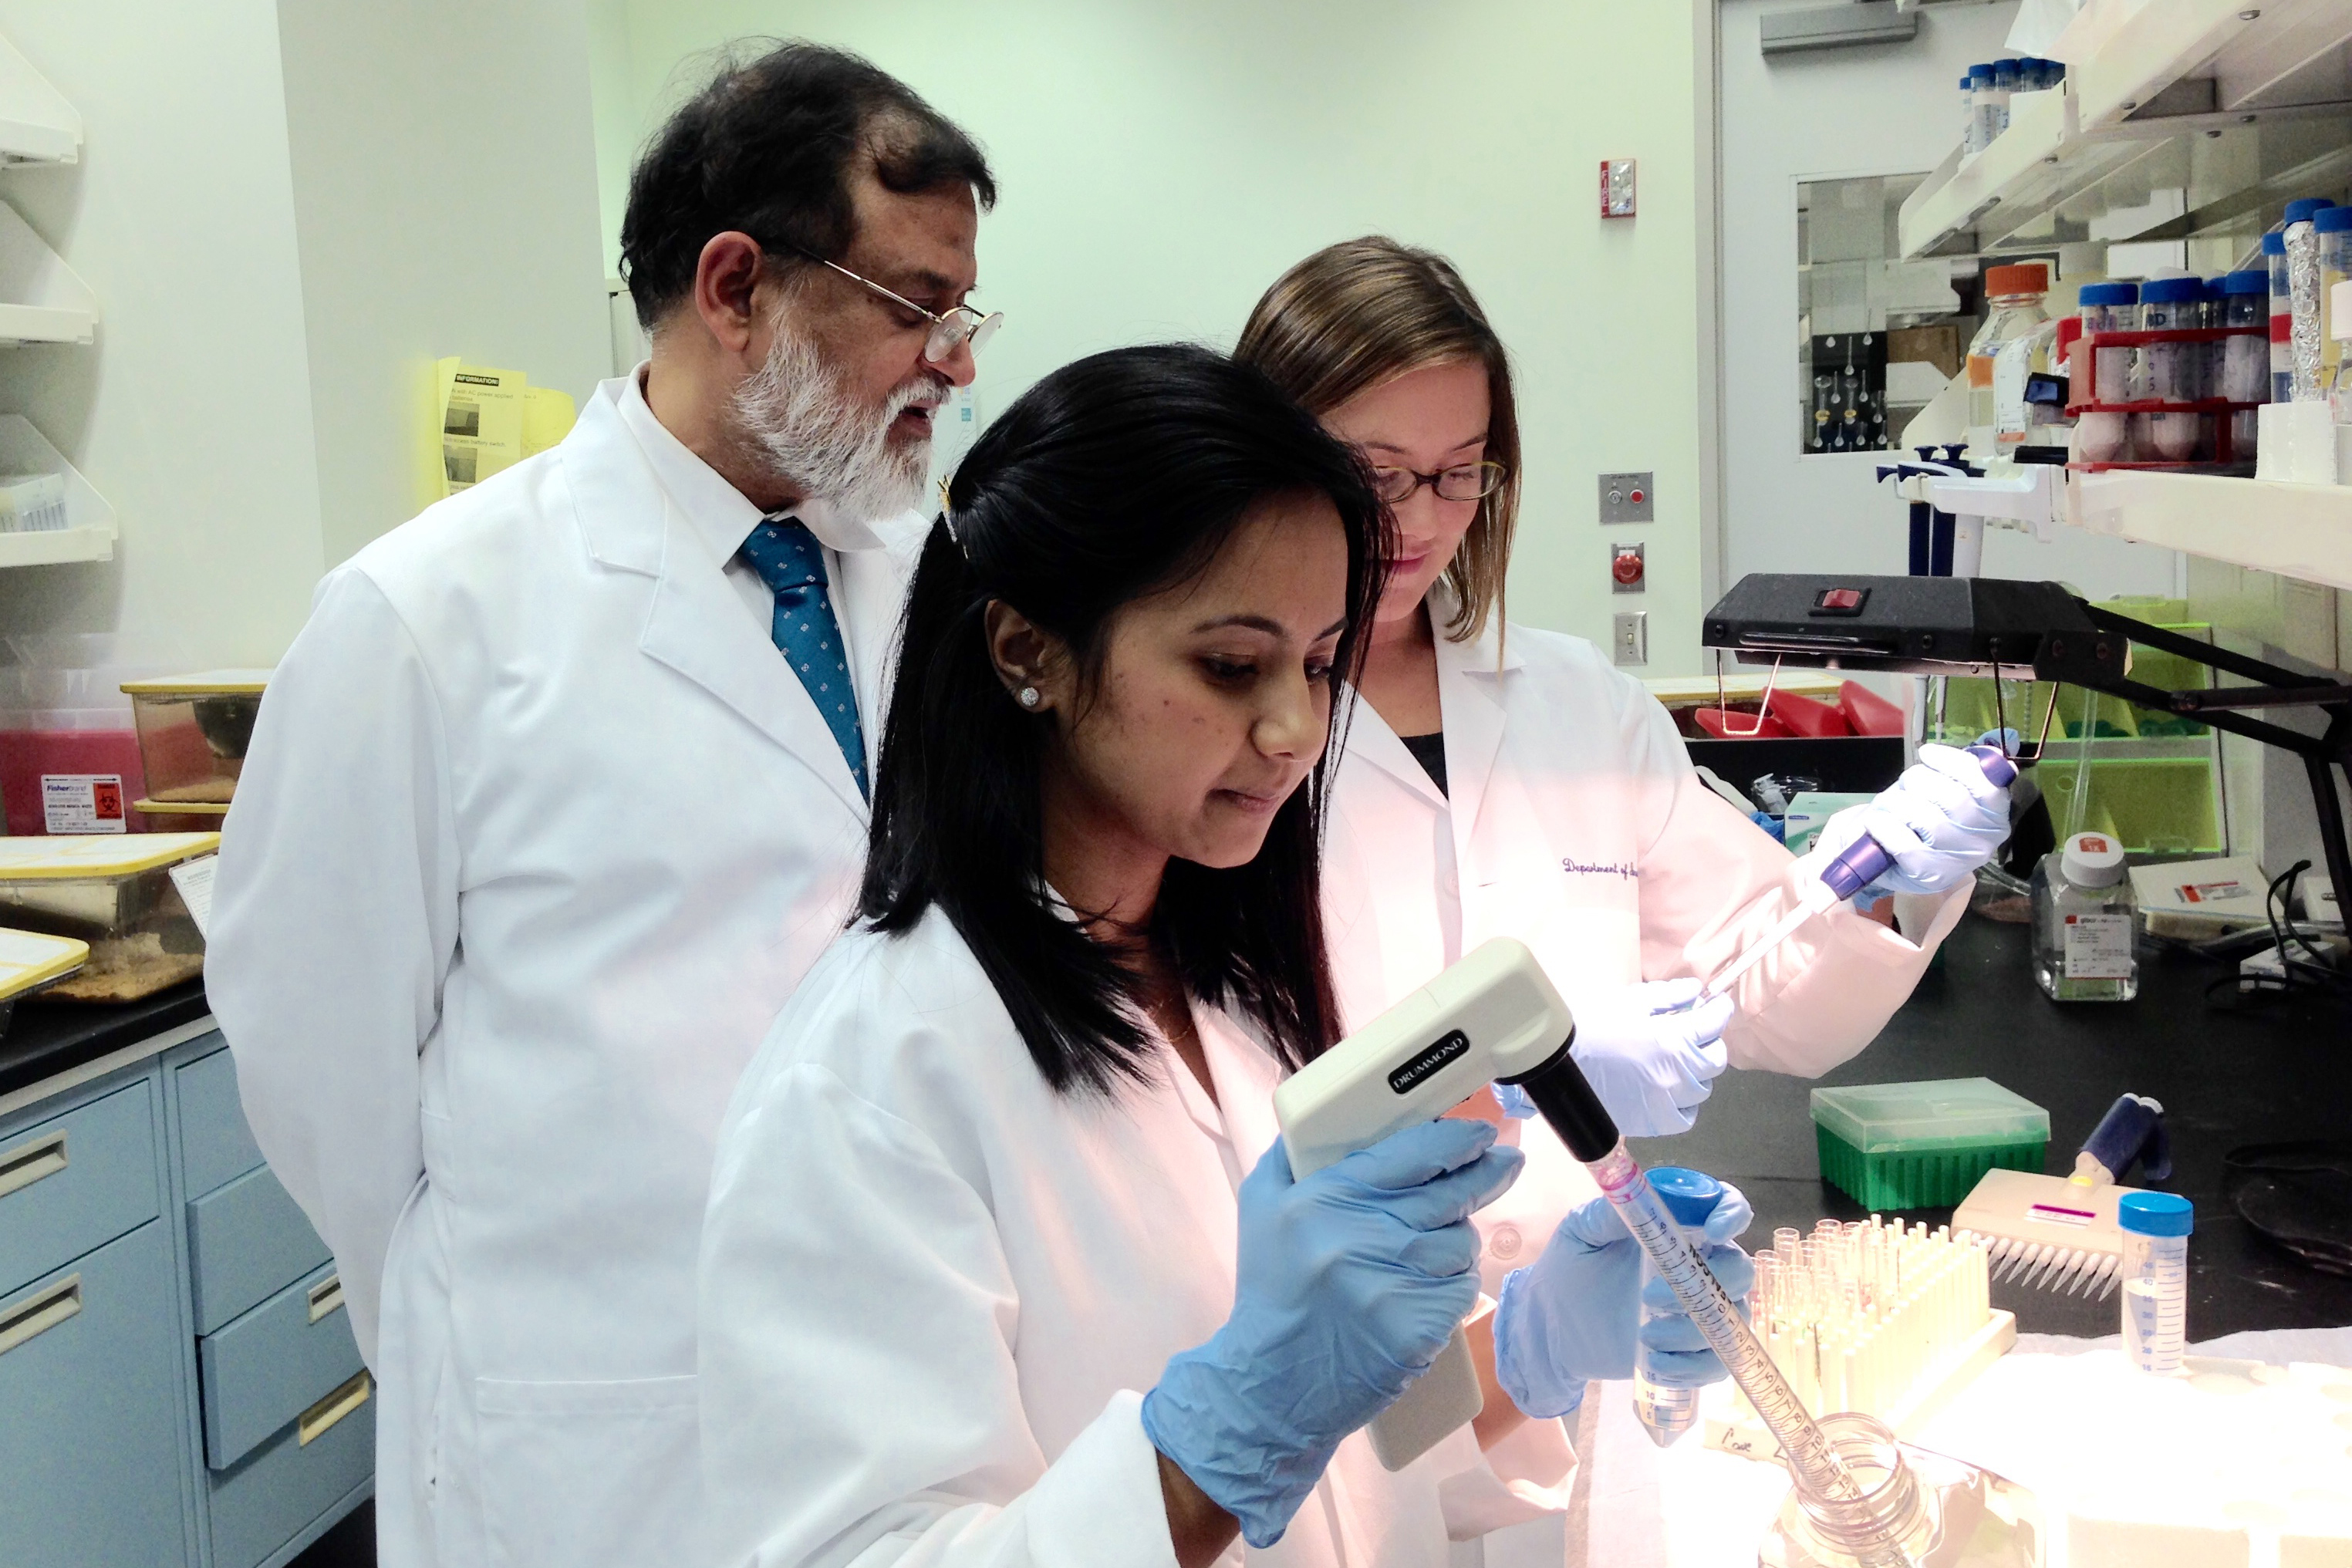 Pramod Srivastava (left), director of the Carole and Ray Neag Comprehensive Cancer Center at UConn Health, oversees students Nandini Acharya (foreground) and Stephanie Floyd in his lab. (Carolyn Pennington/UConn Health Photo)